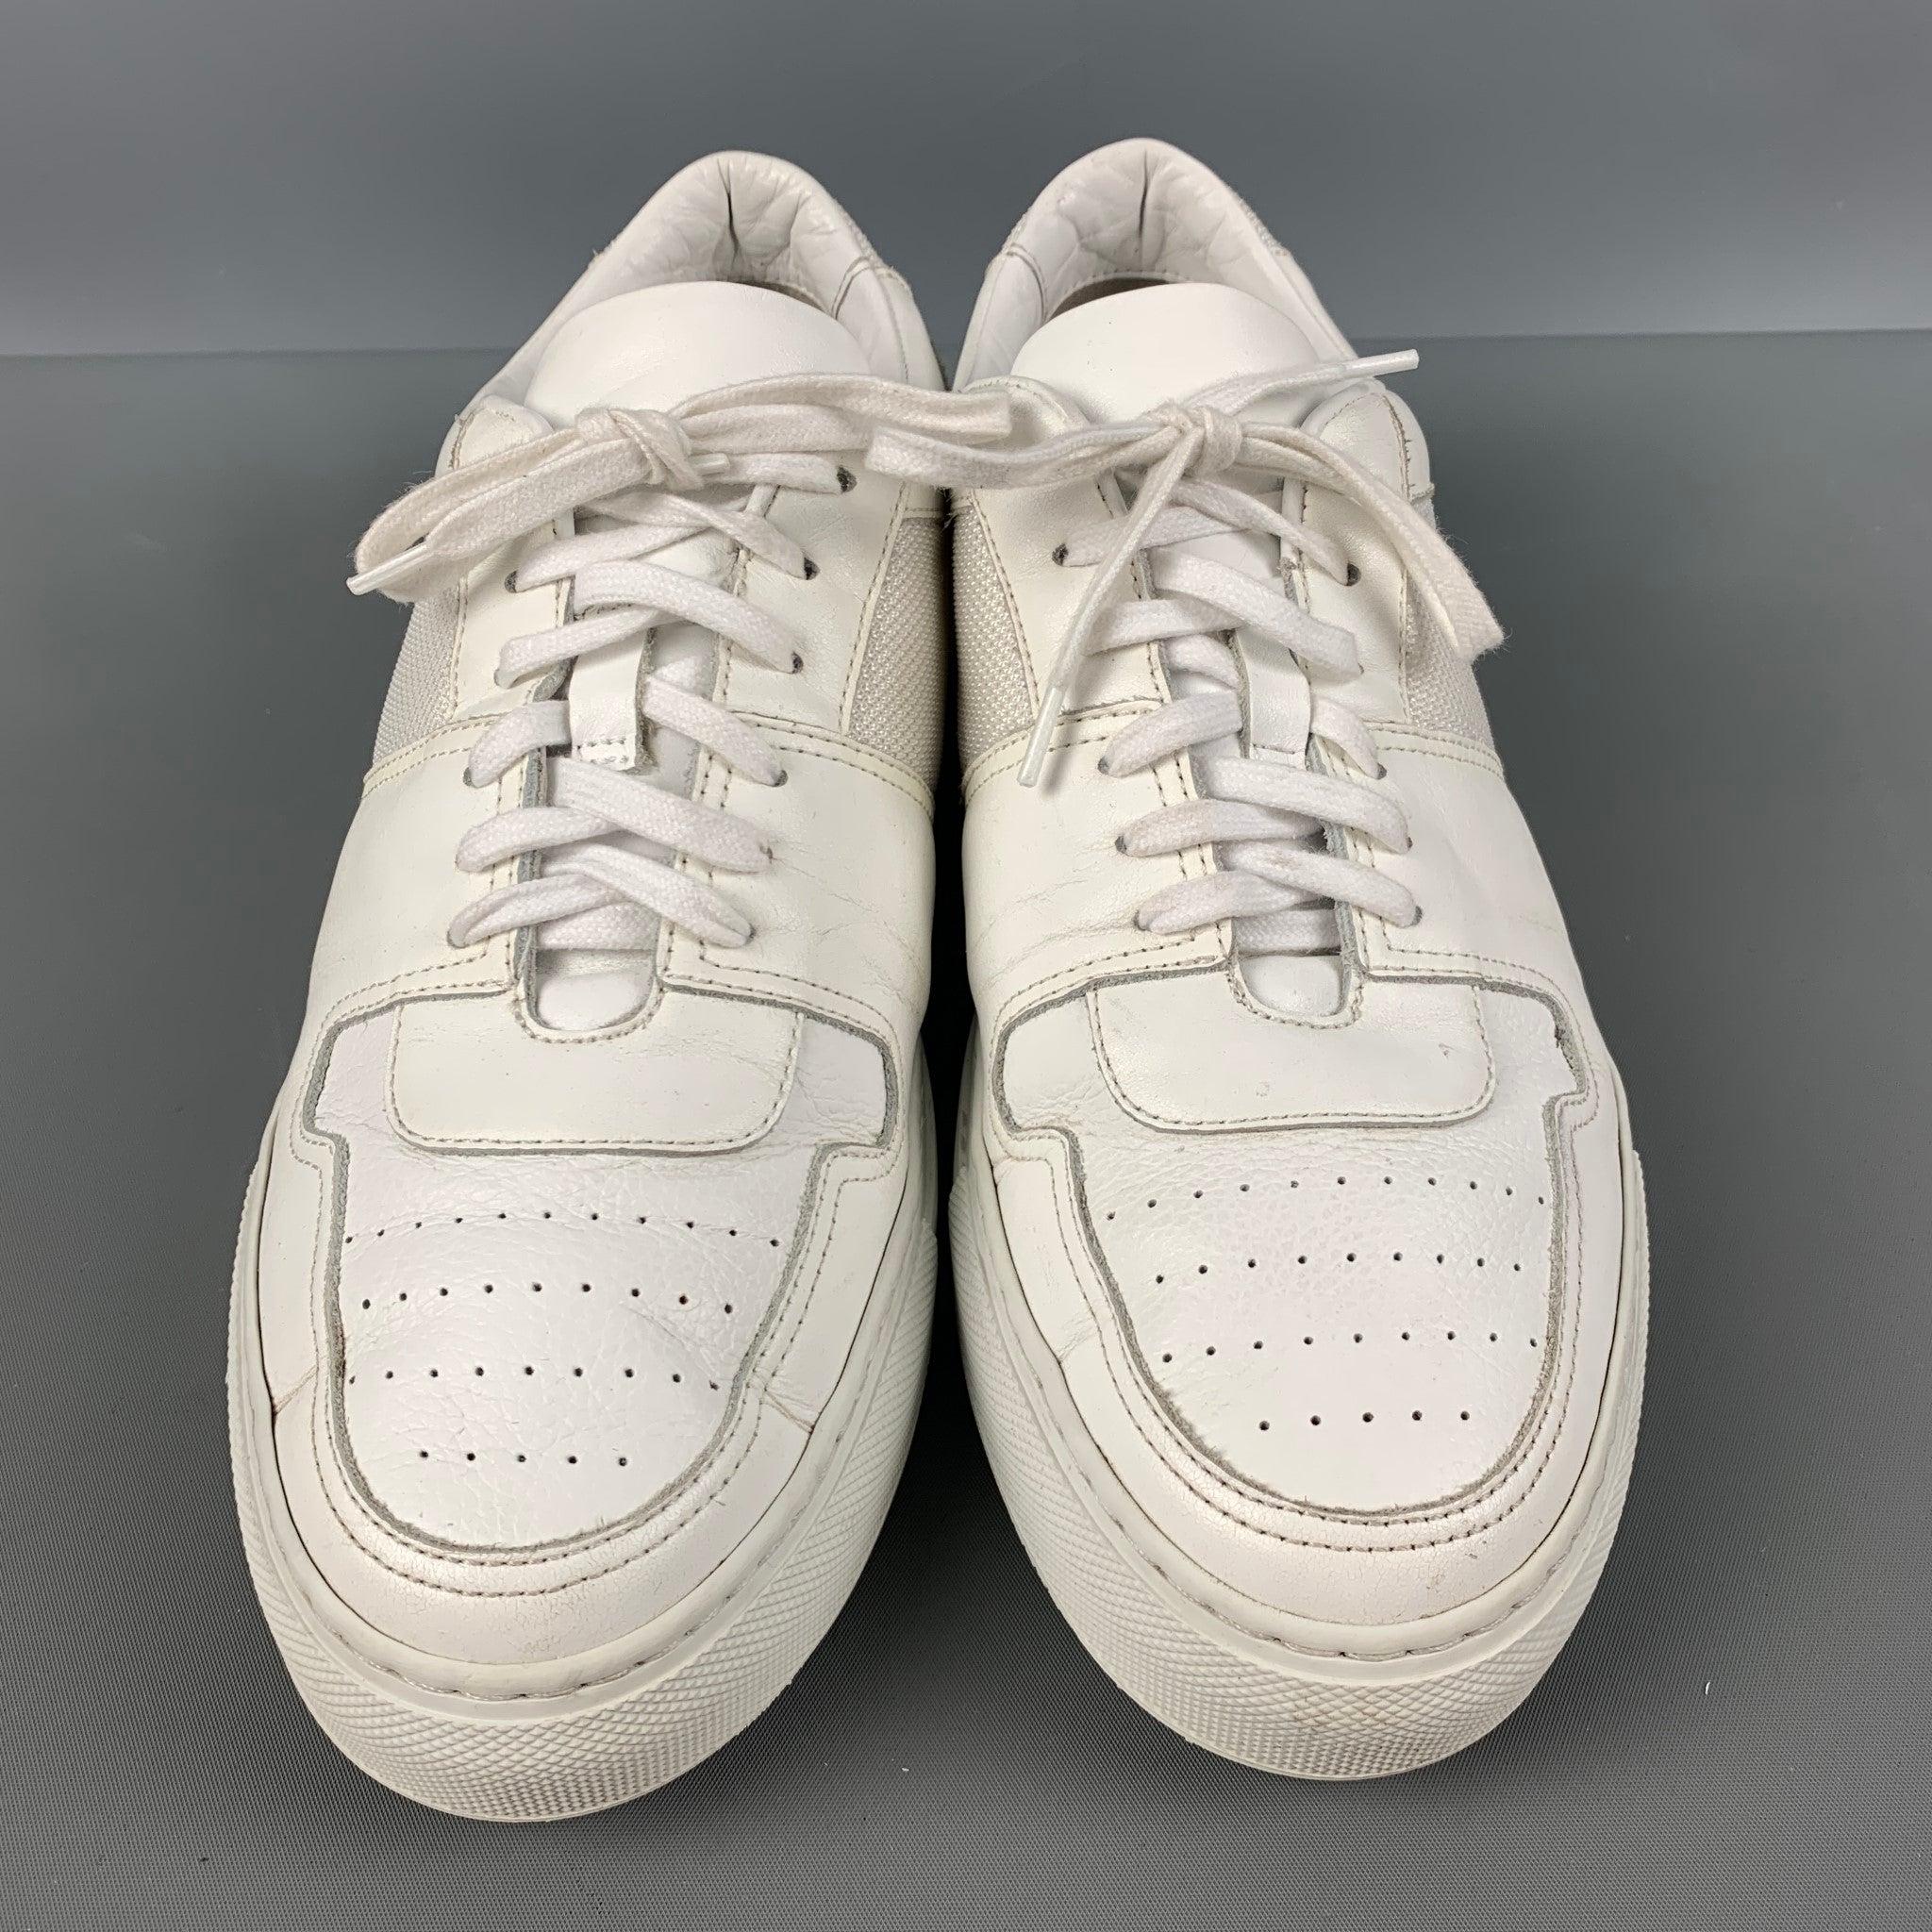 Men's COMMON PROJECTS Size 8 White Mixed Materials Leather Low Top Sneakers